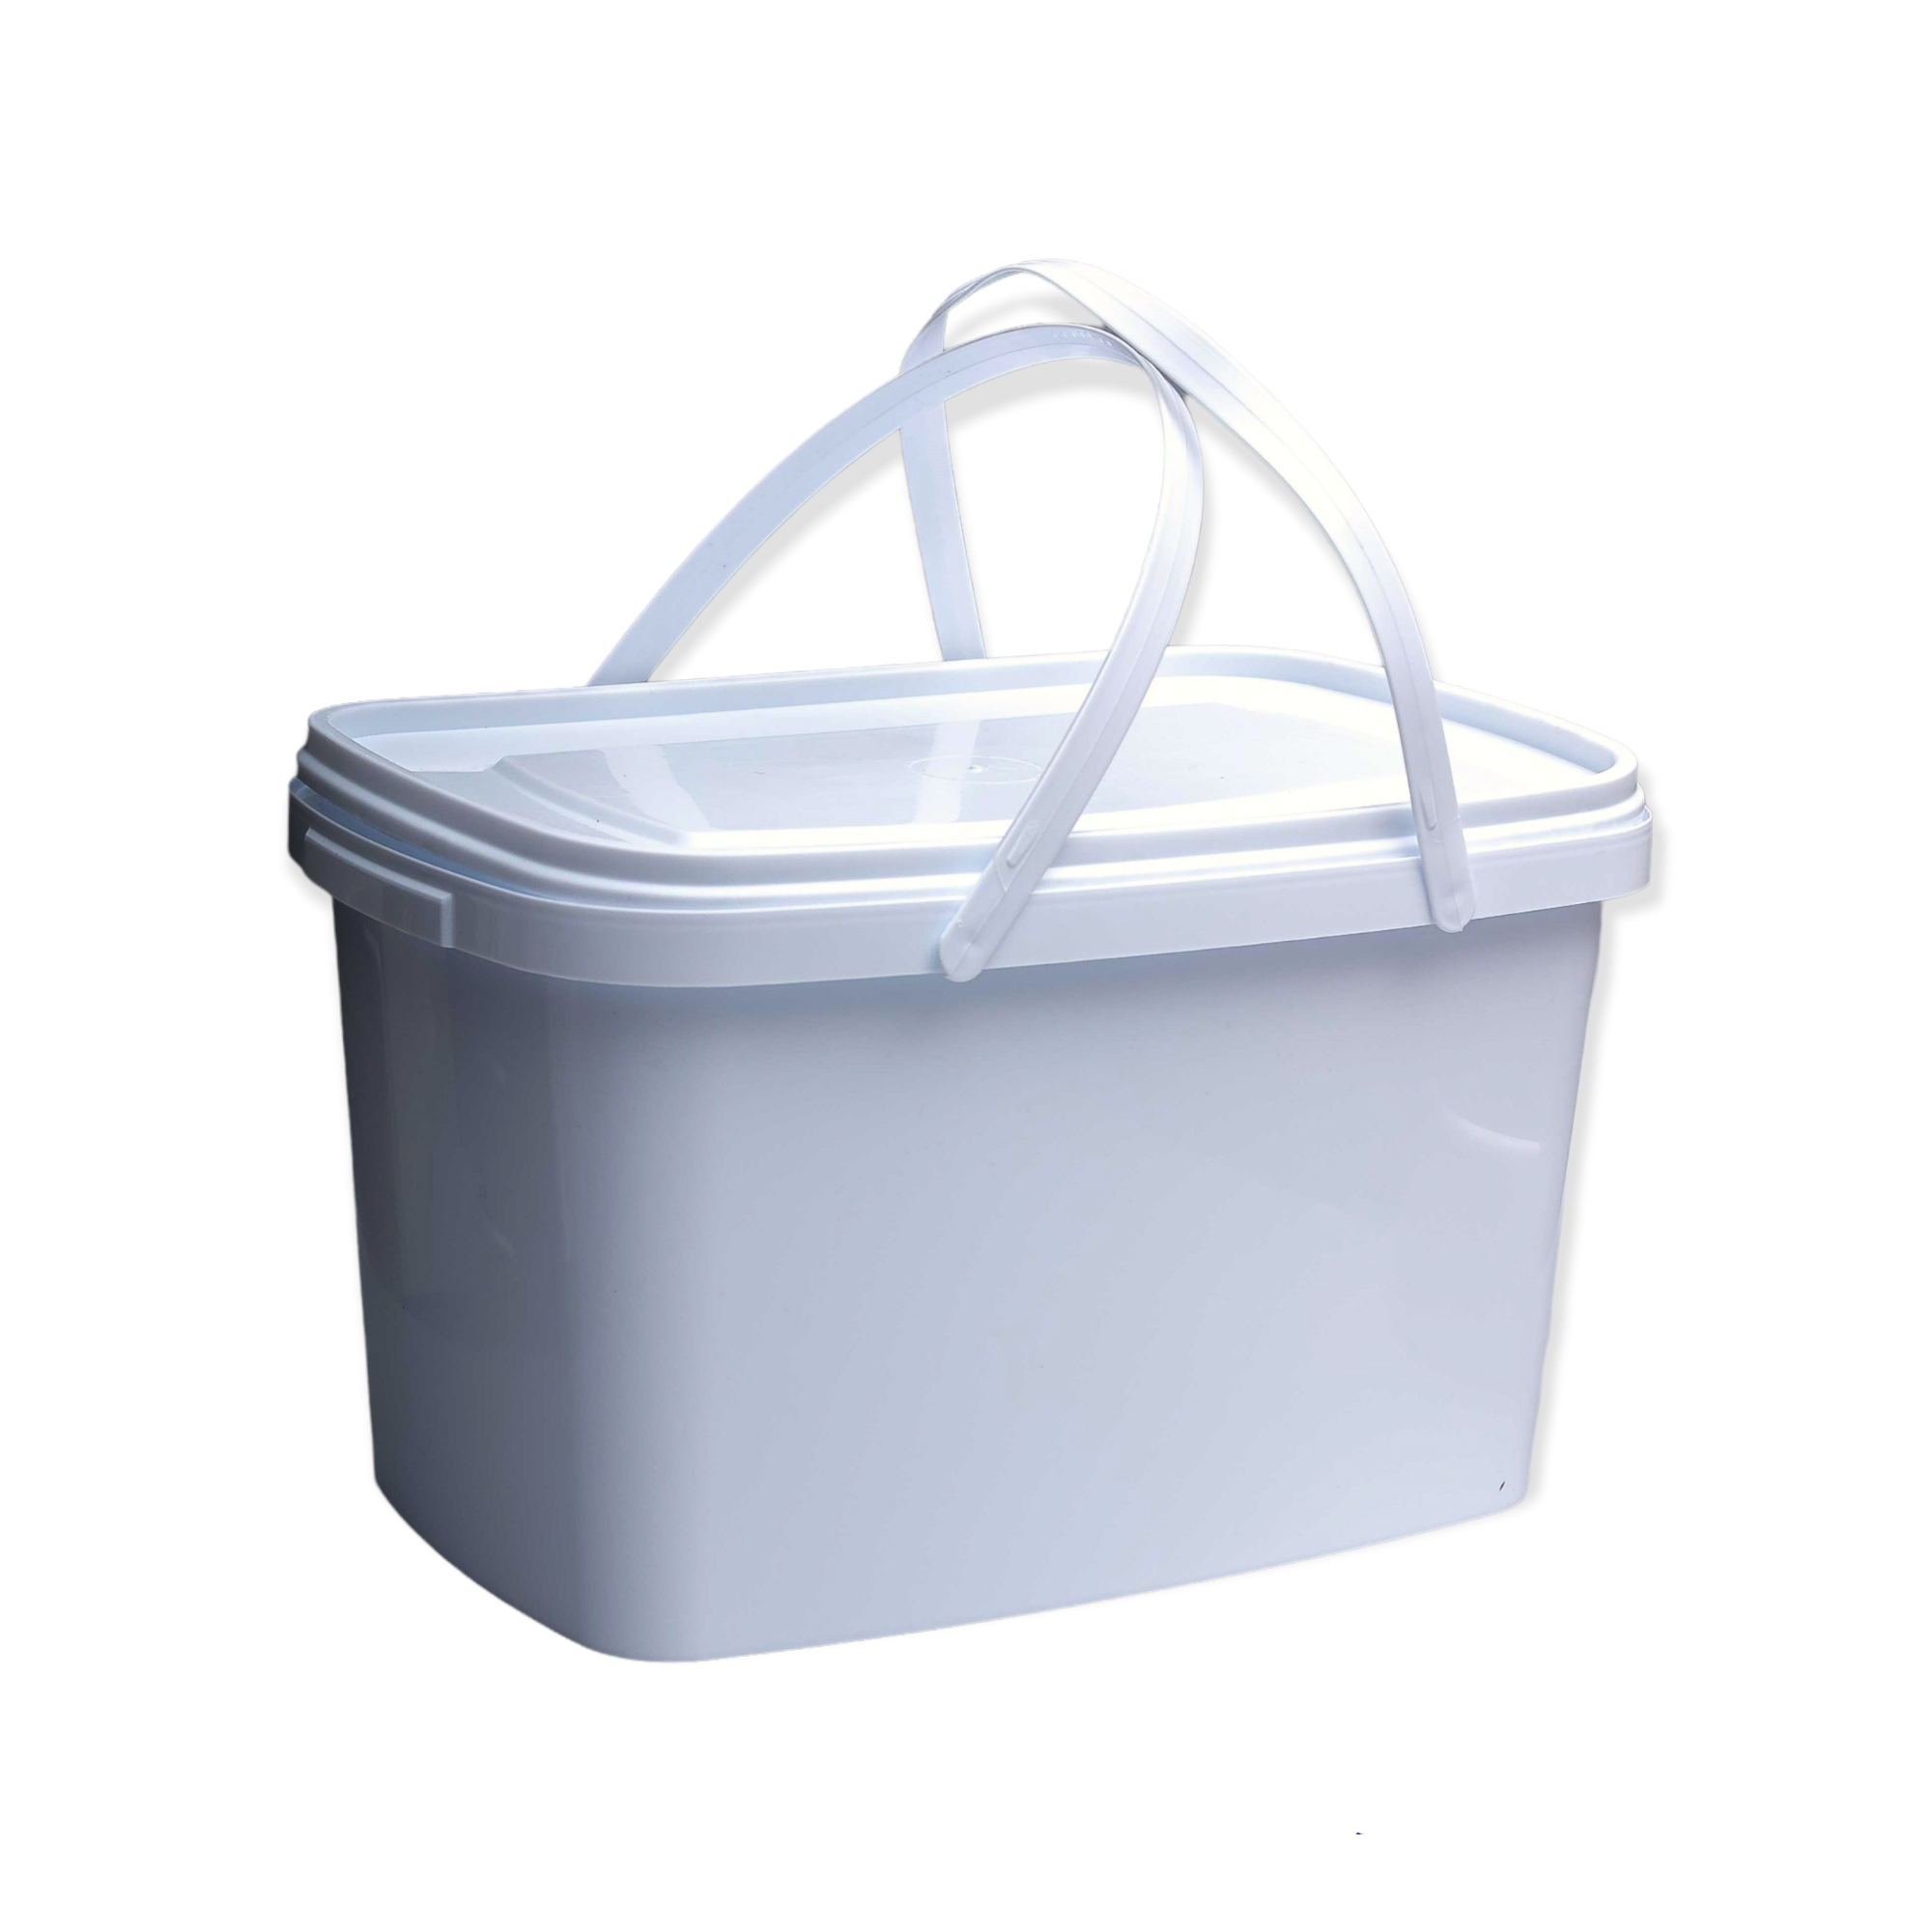 10L Plastic Bucket Rectangular Tamperproof with Handle and Lid